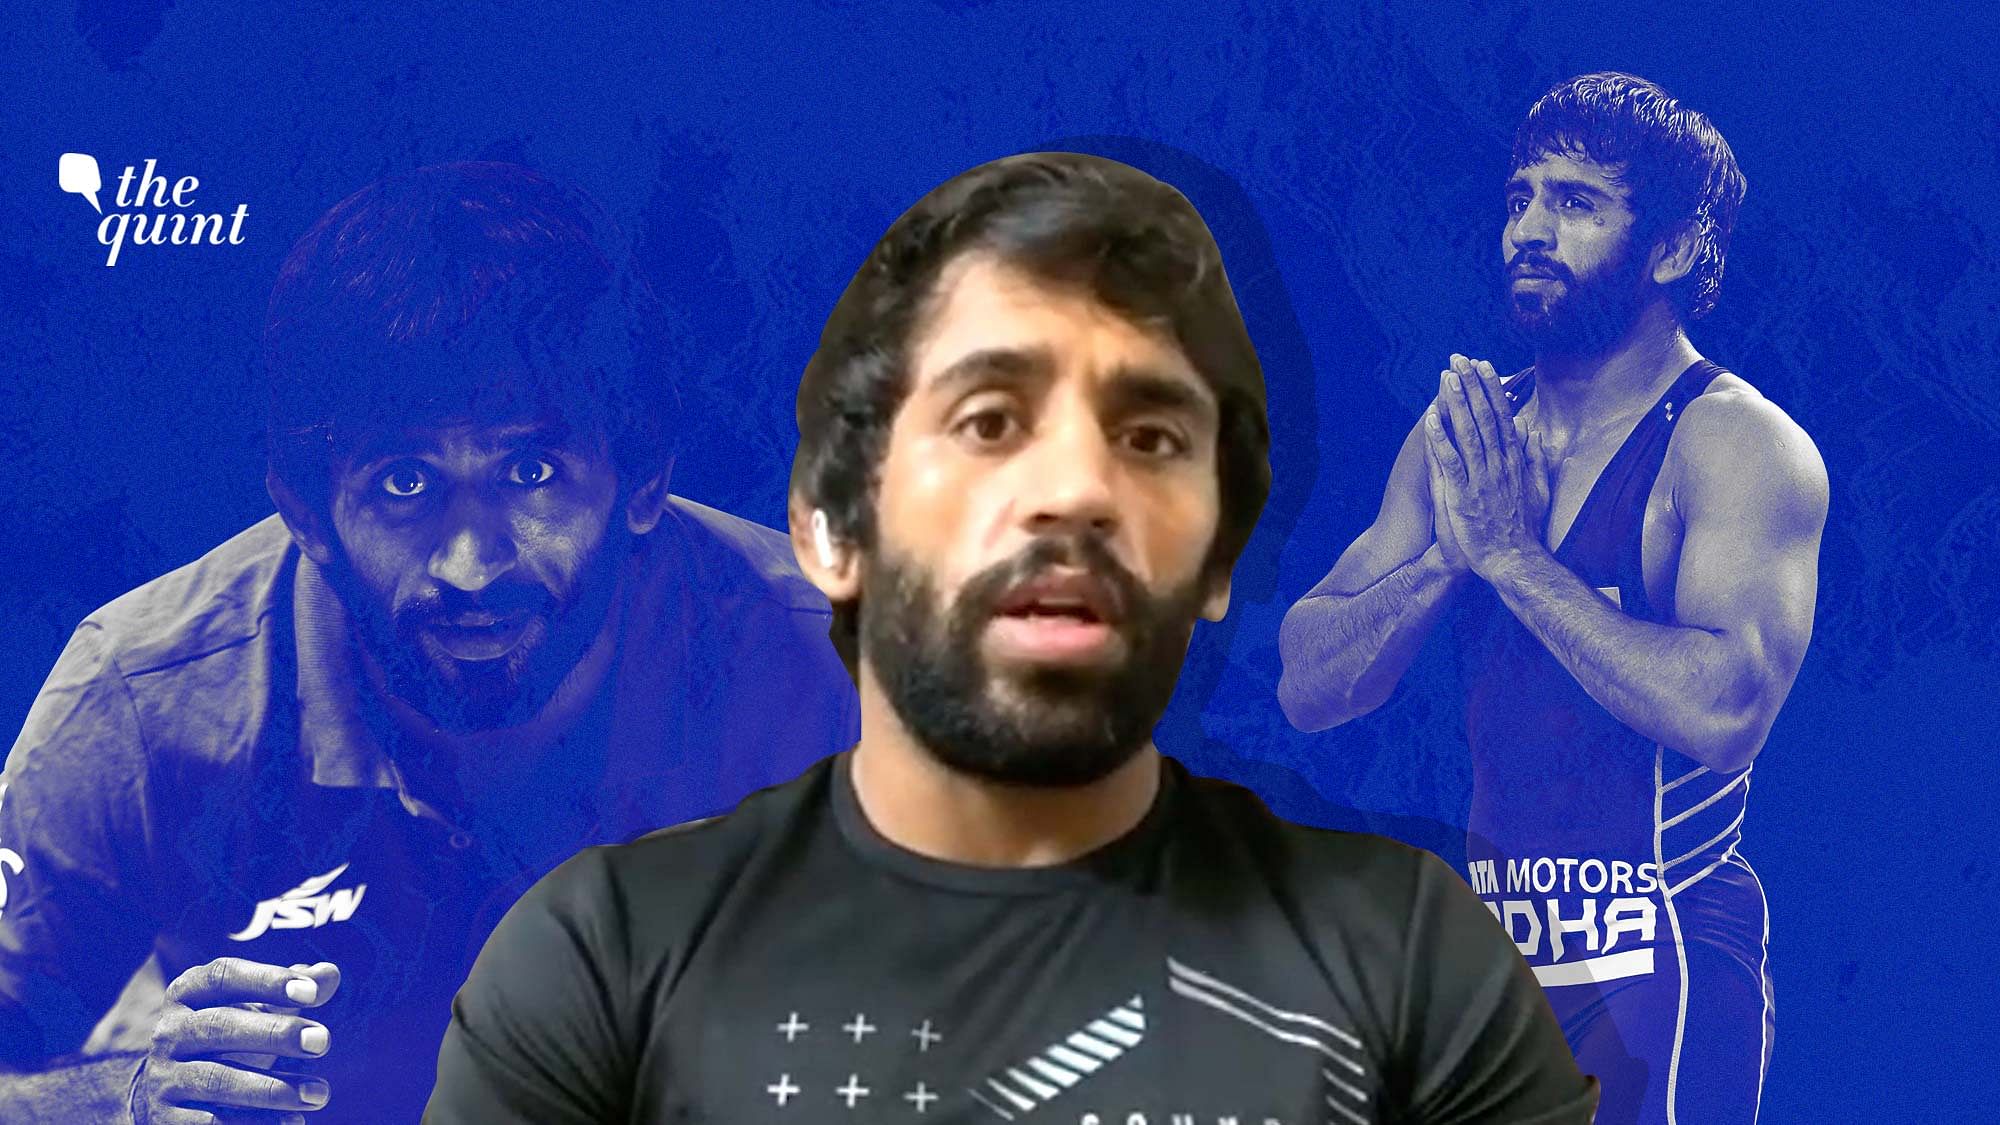 Bajrang Punia talks about the pressure of winning a medal for India and the backlash athletes face when they don’t succeed.